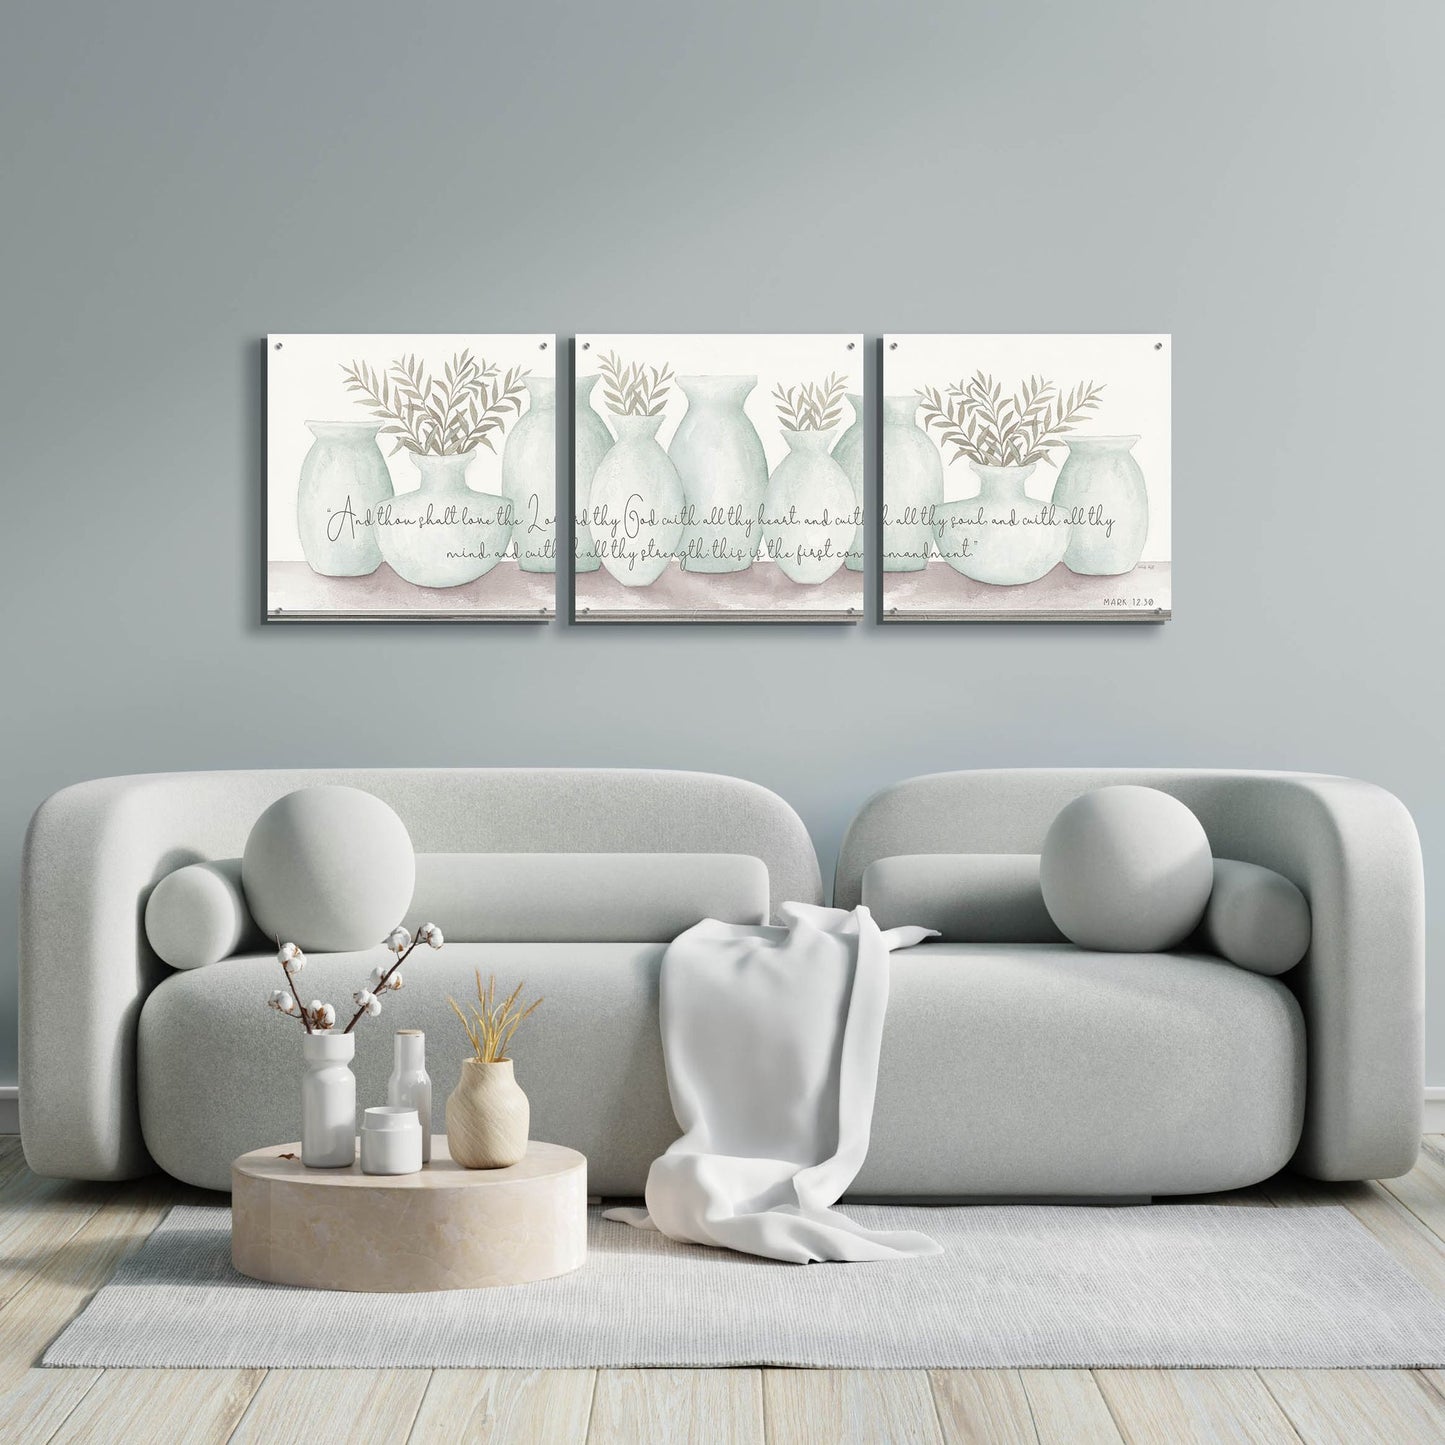 Epic Art 'Love the Lord Your God' by Cindy Jacobs, Acrylic Glass Wall Art, 3 Piece Set,72x24